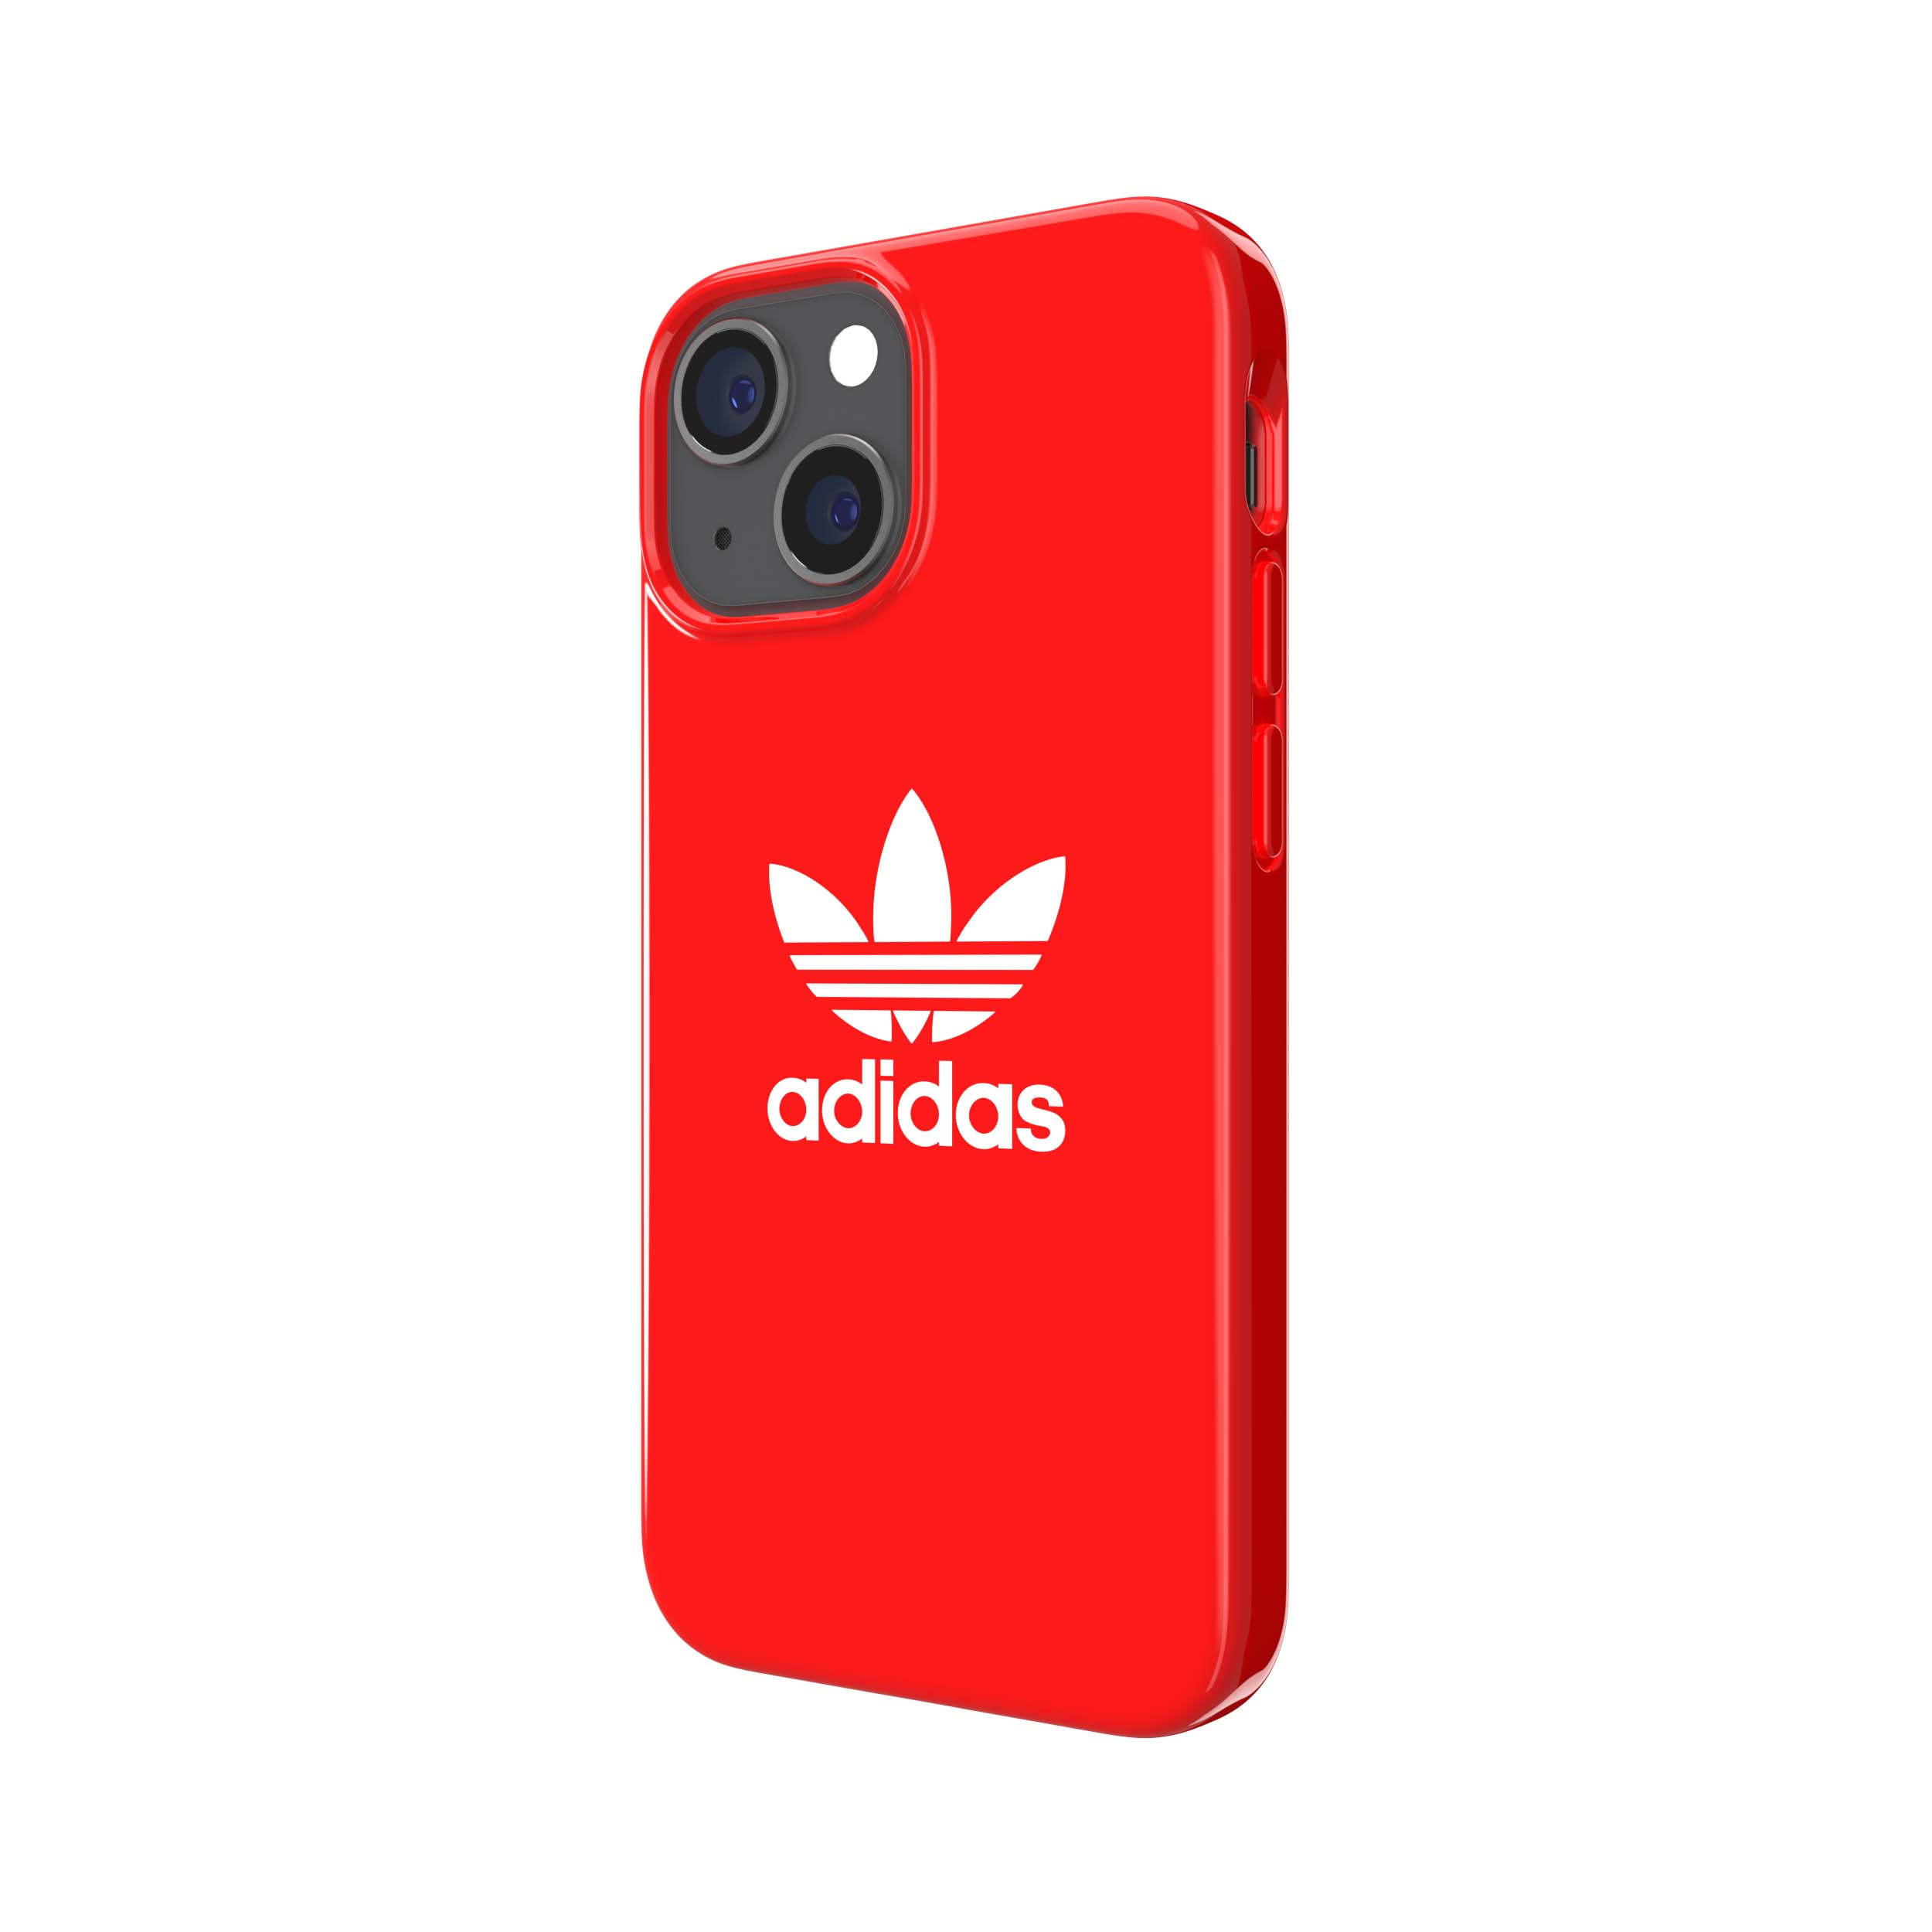 13 ADIDAS APPLE, MINI, Trefoil, IPHONE Backcover, Snap RED Case